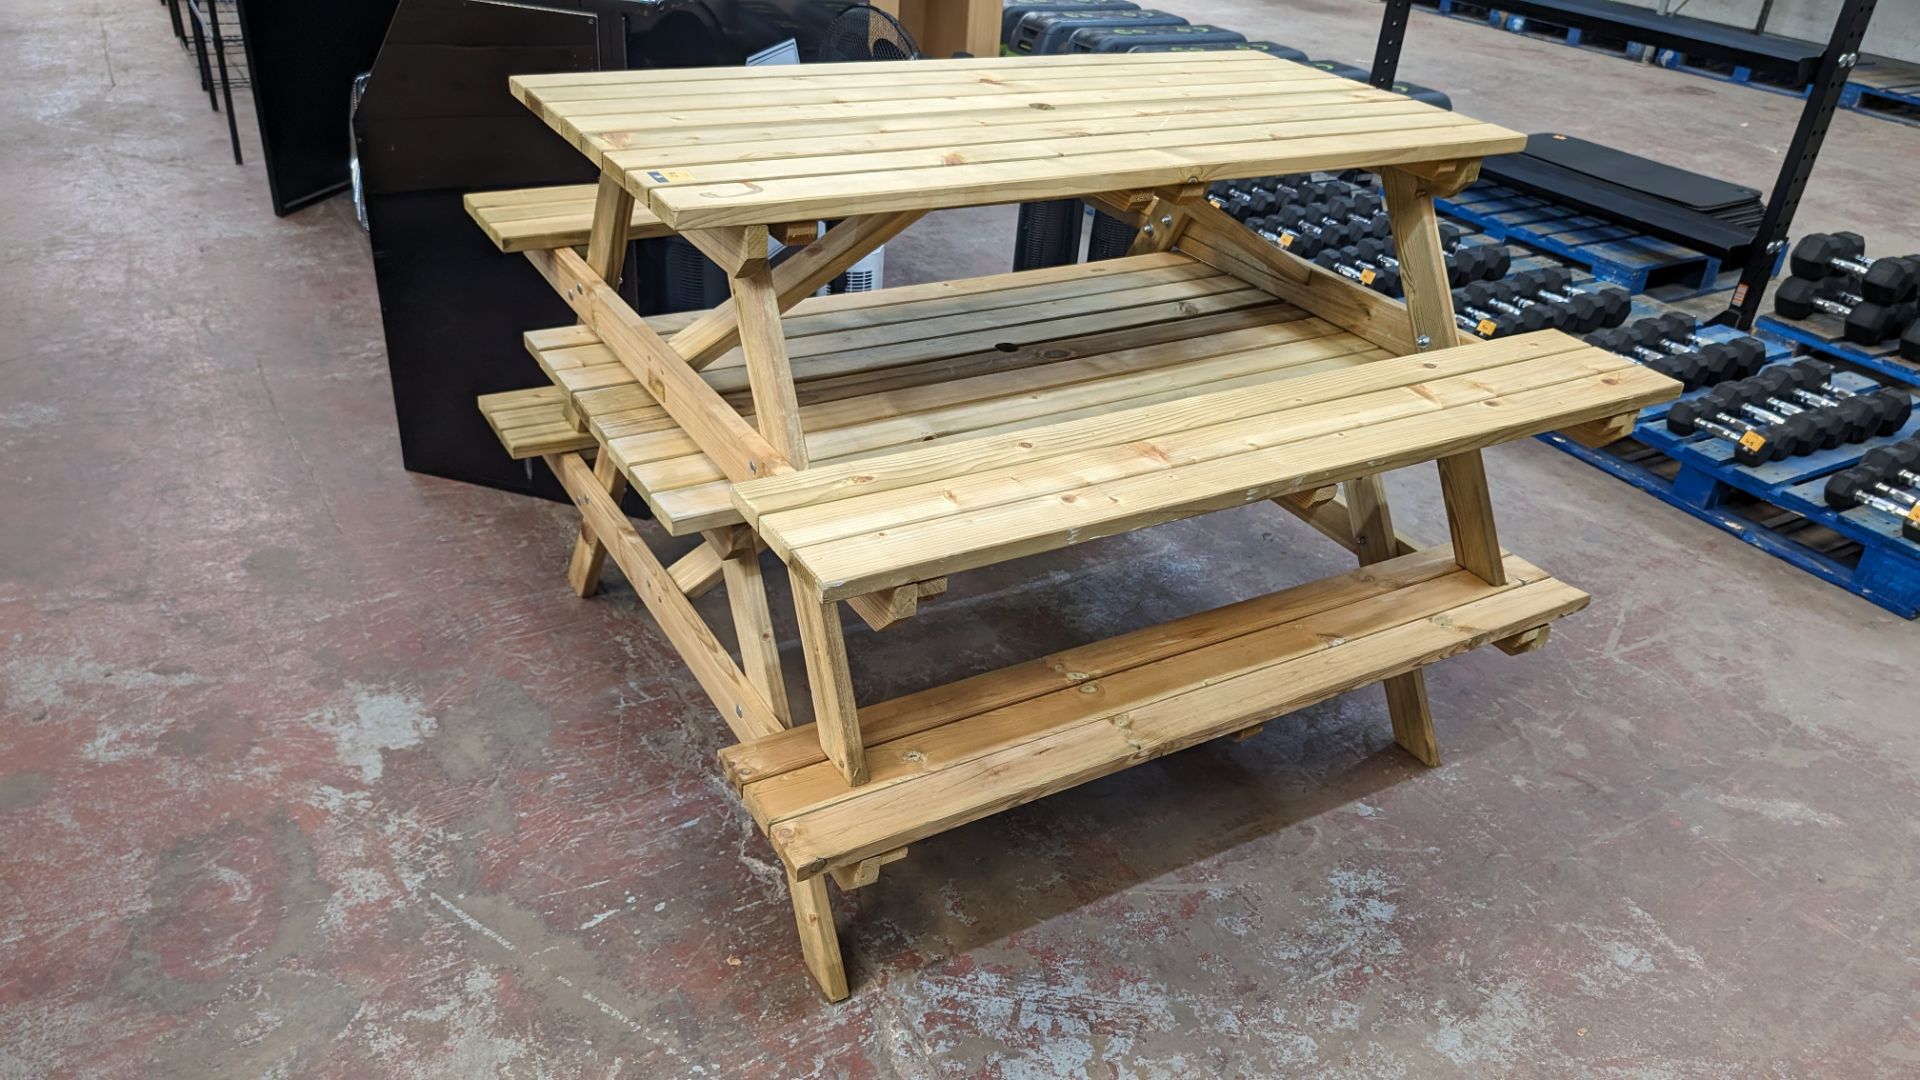 2 off Rowlinson wooden picnic benches, each with max dimensions including the seating sections of ap - Image 2 of 6